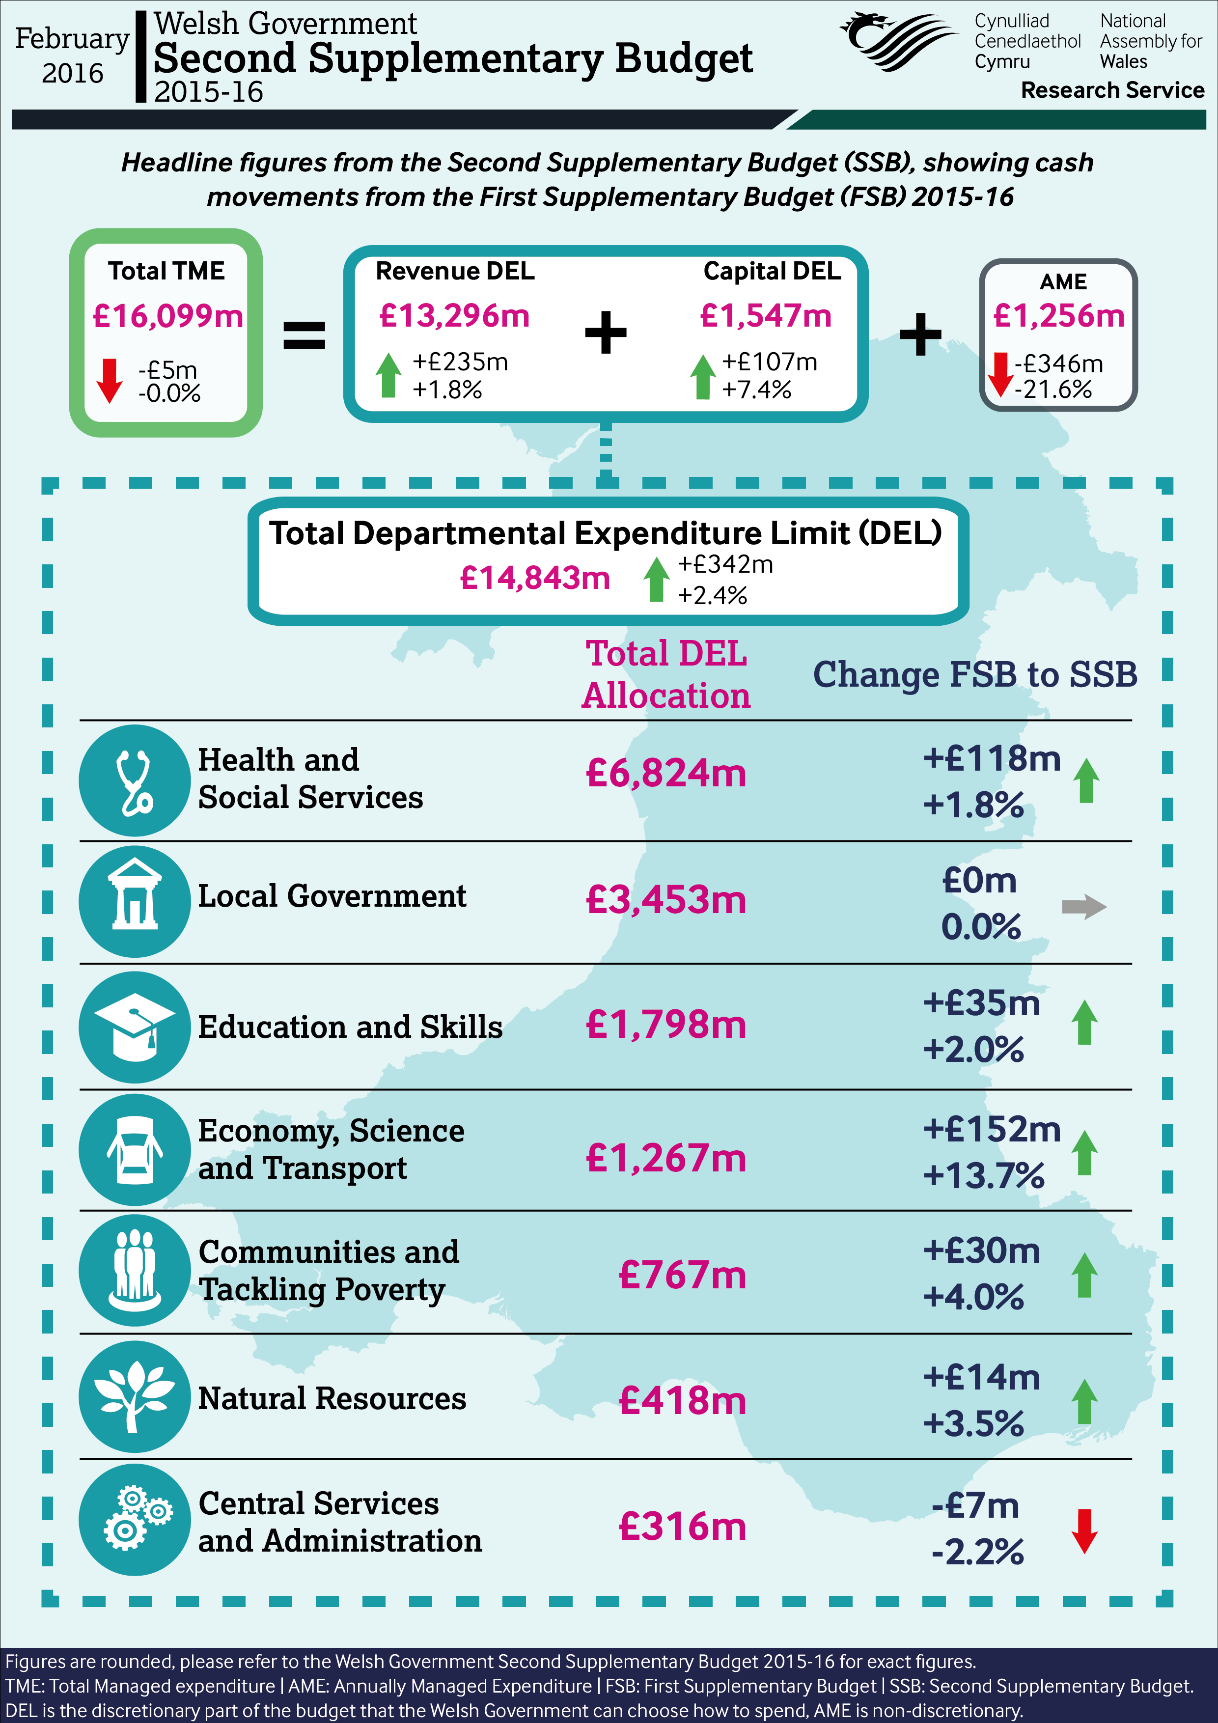 The infographic shows changes to the overall allocation of expenditure between Welsh Government departments in the Second Supplementary Budget 2015-16